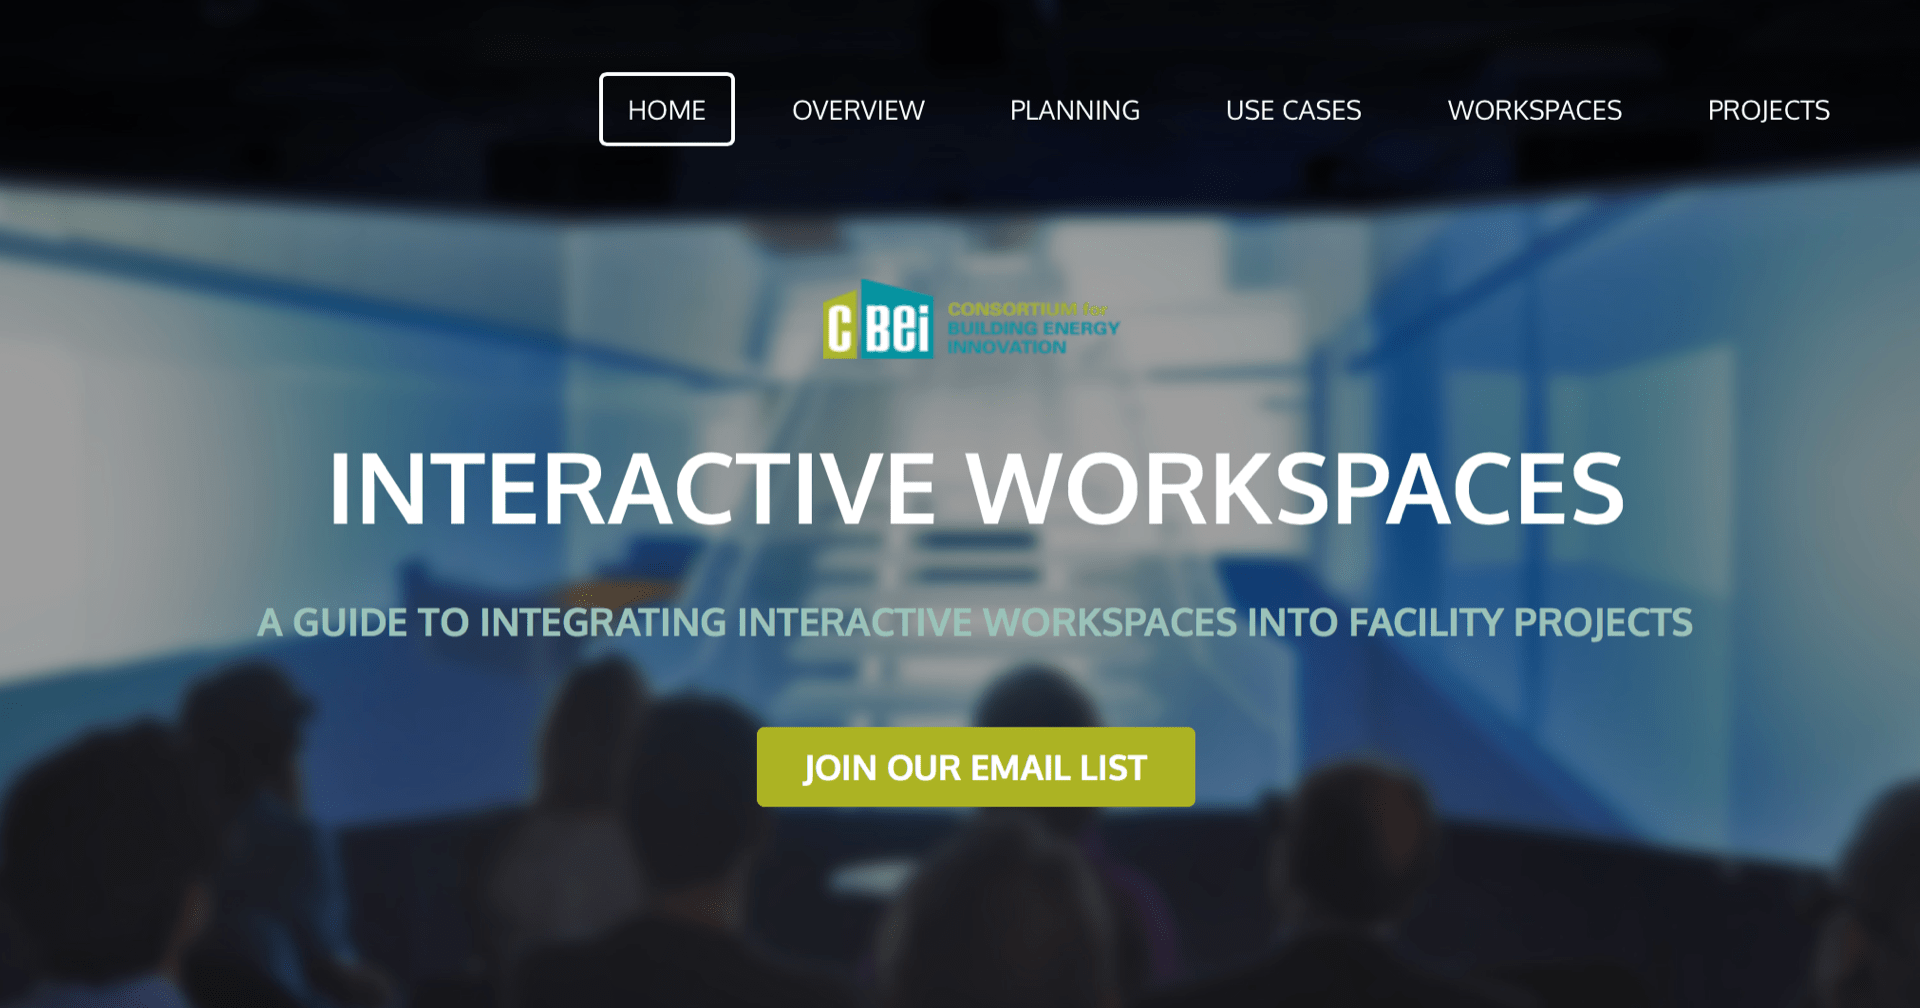 Webpage image for the Interactive Workspaces guide